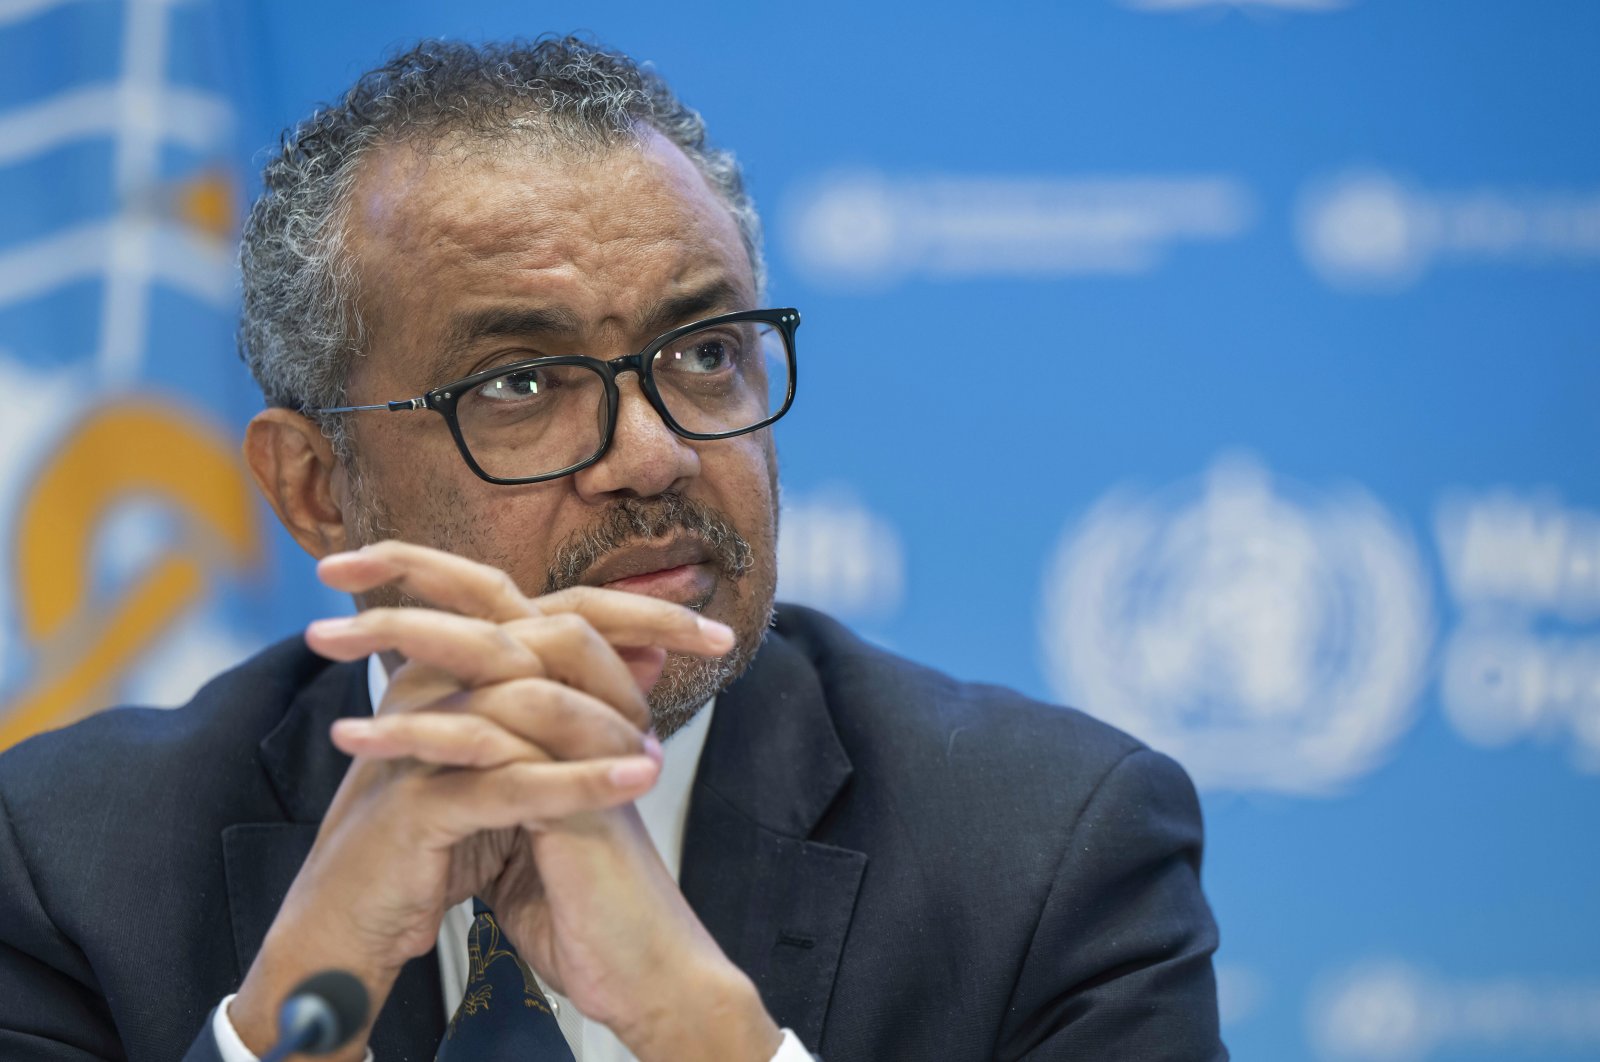 Tedros Adhanom Ghebreyesus, director general of the World Health Organization, speaks during a news conference at WHO headquarters in Geneva, Switzerland, Dec. 14, 2022. (AP File Photo)